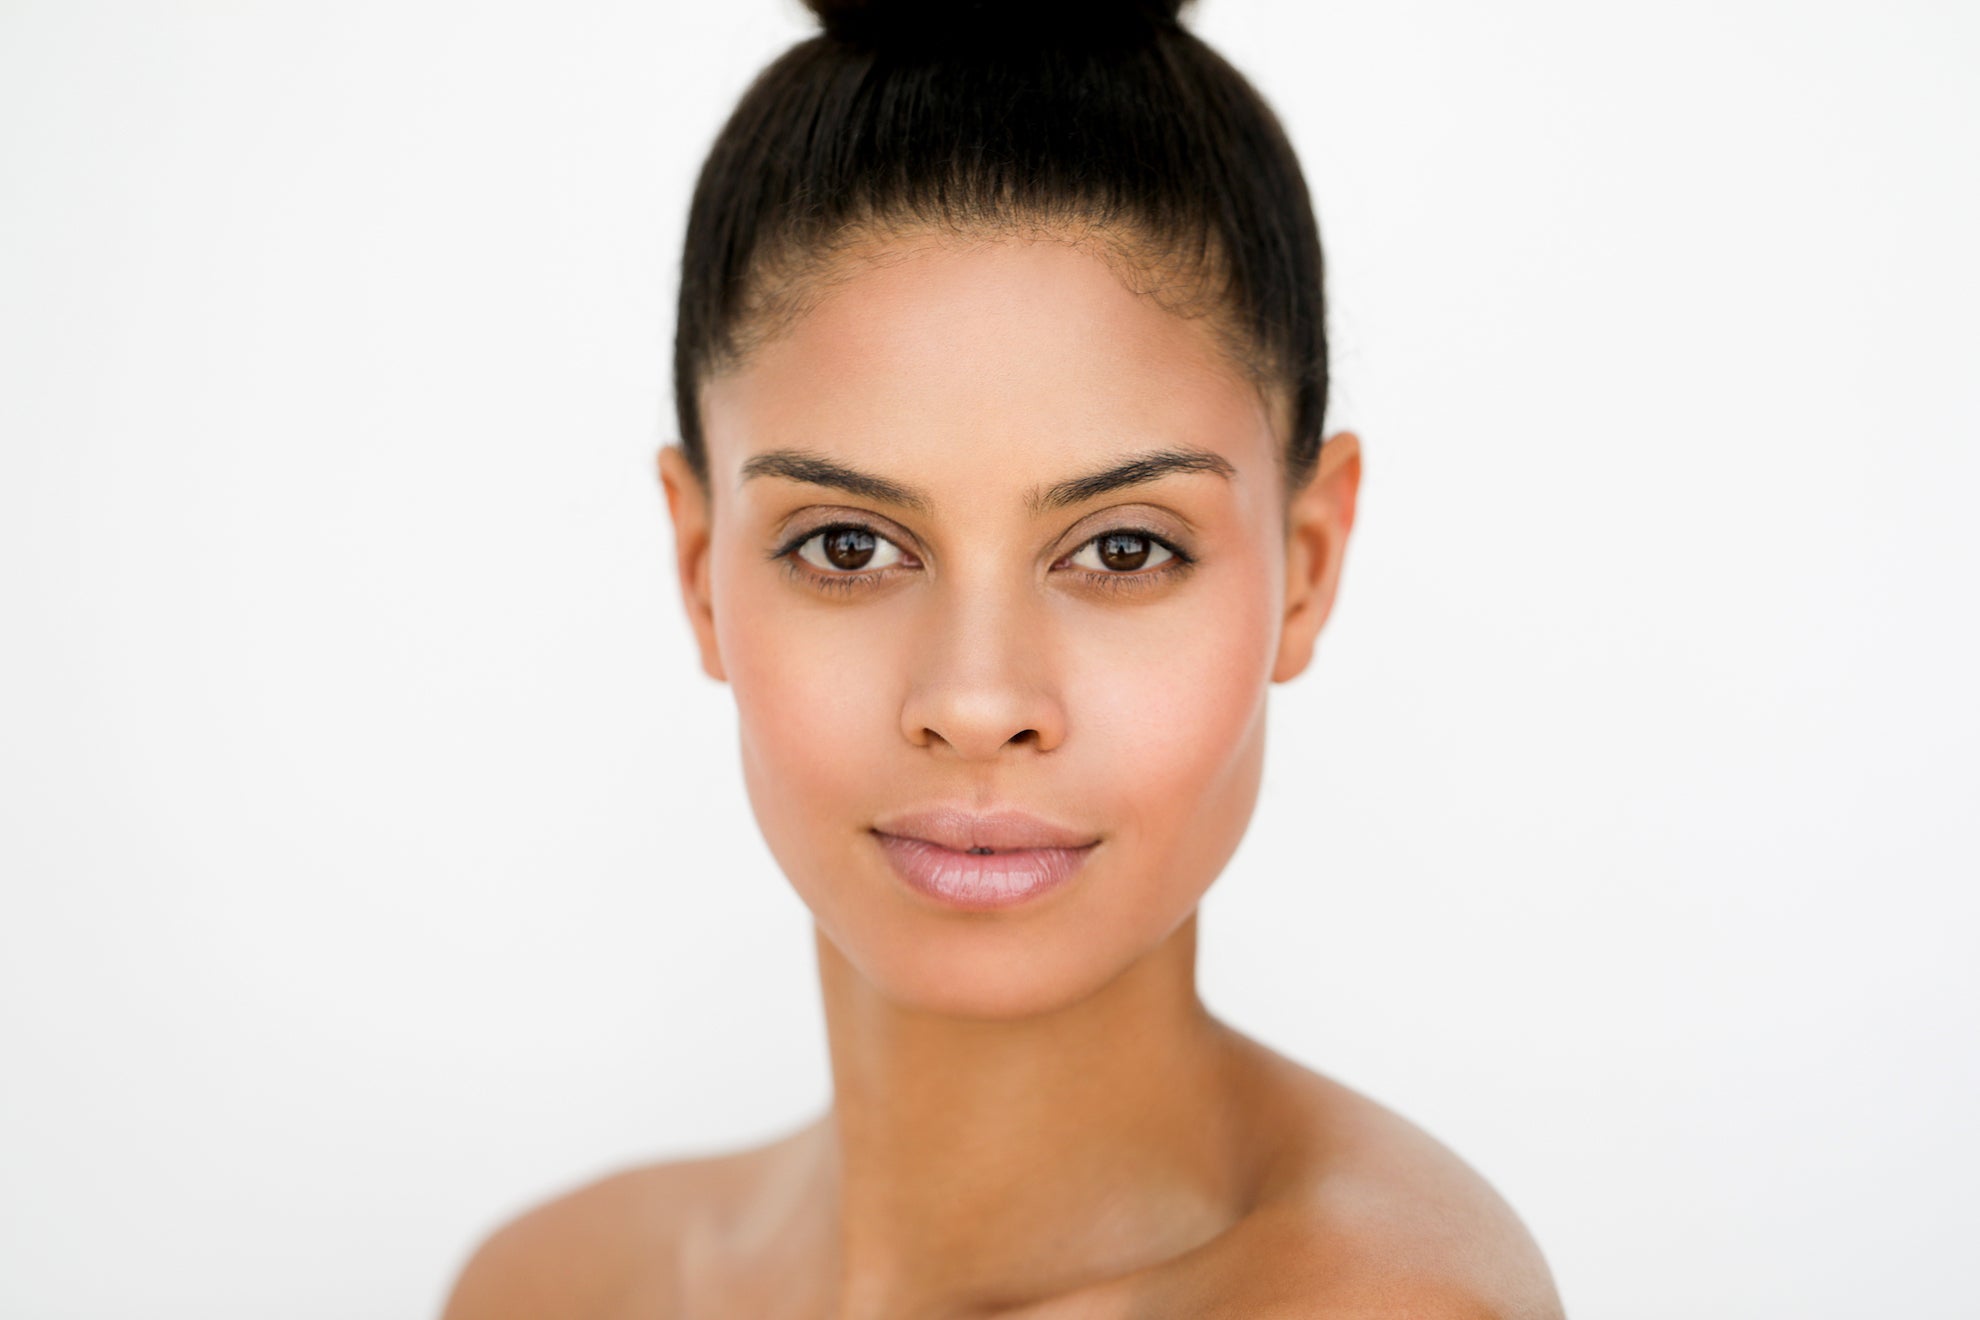 Woman with glowing skin in front of a white background.